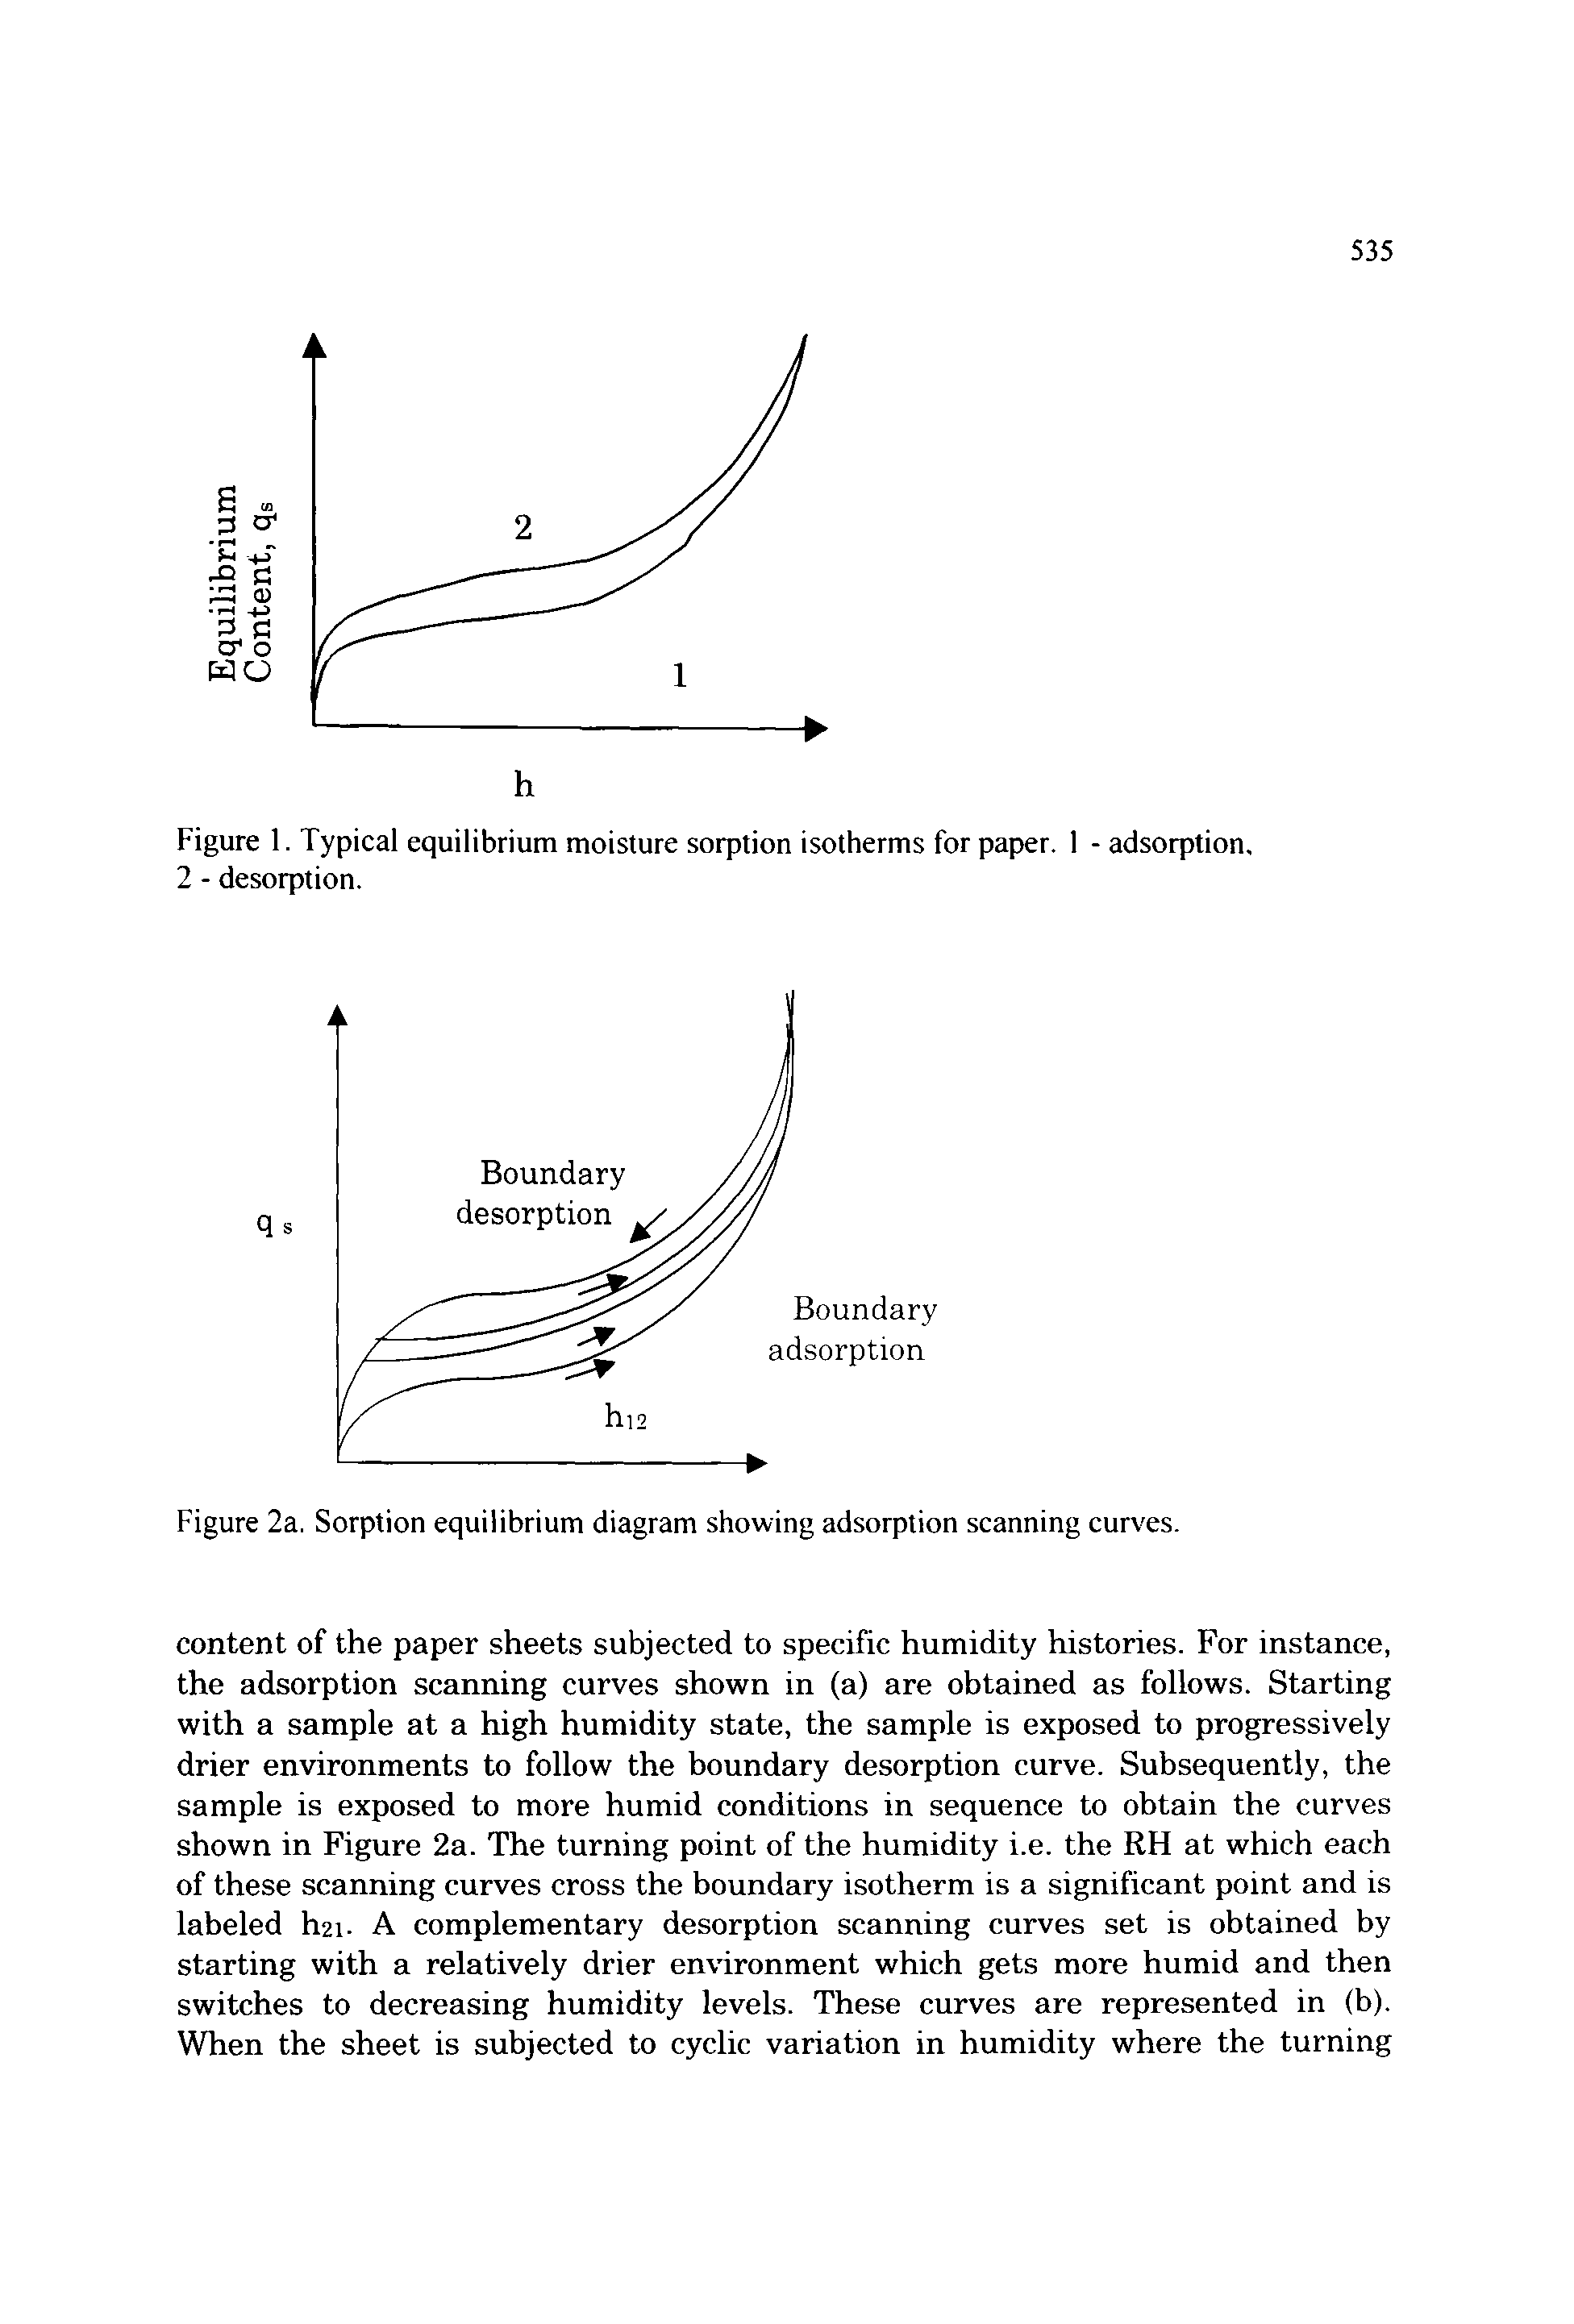 Figure 1. Typical equilibrium moisture sorption isotherms for paper. I - adsorption, 2 - desorption.